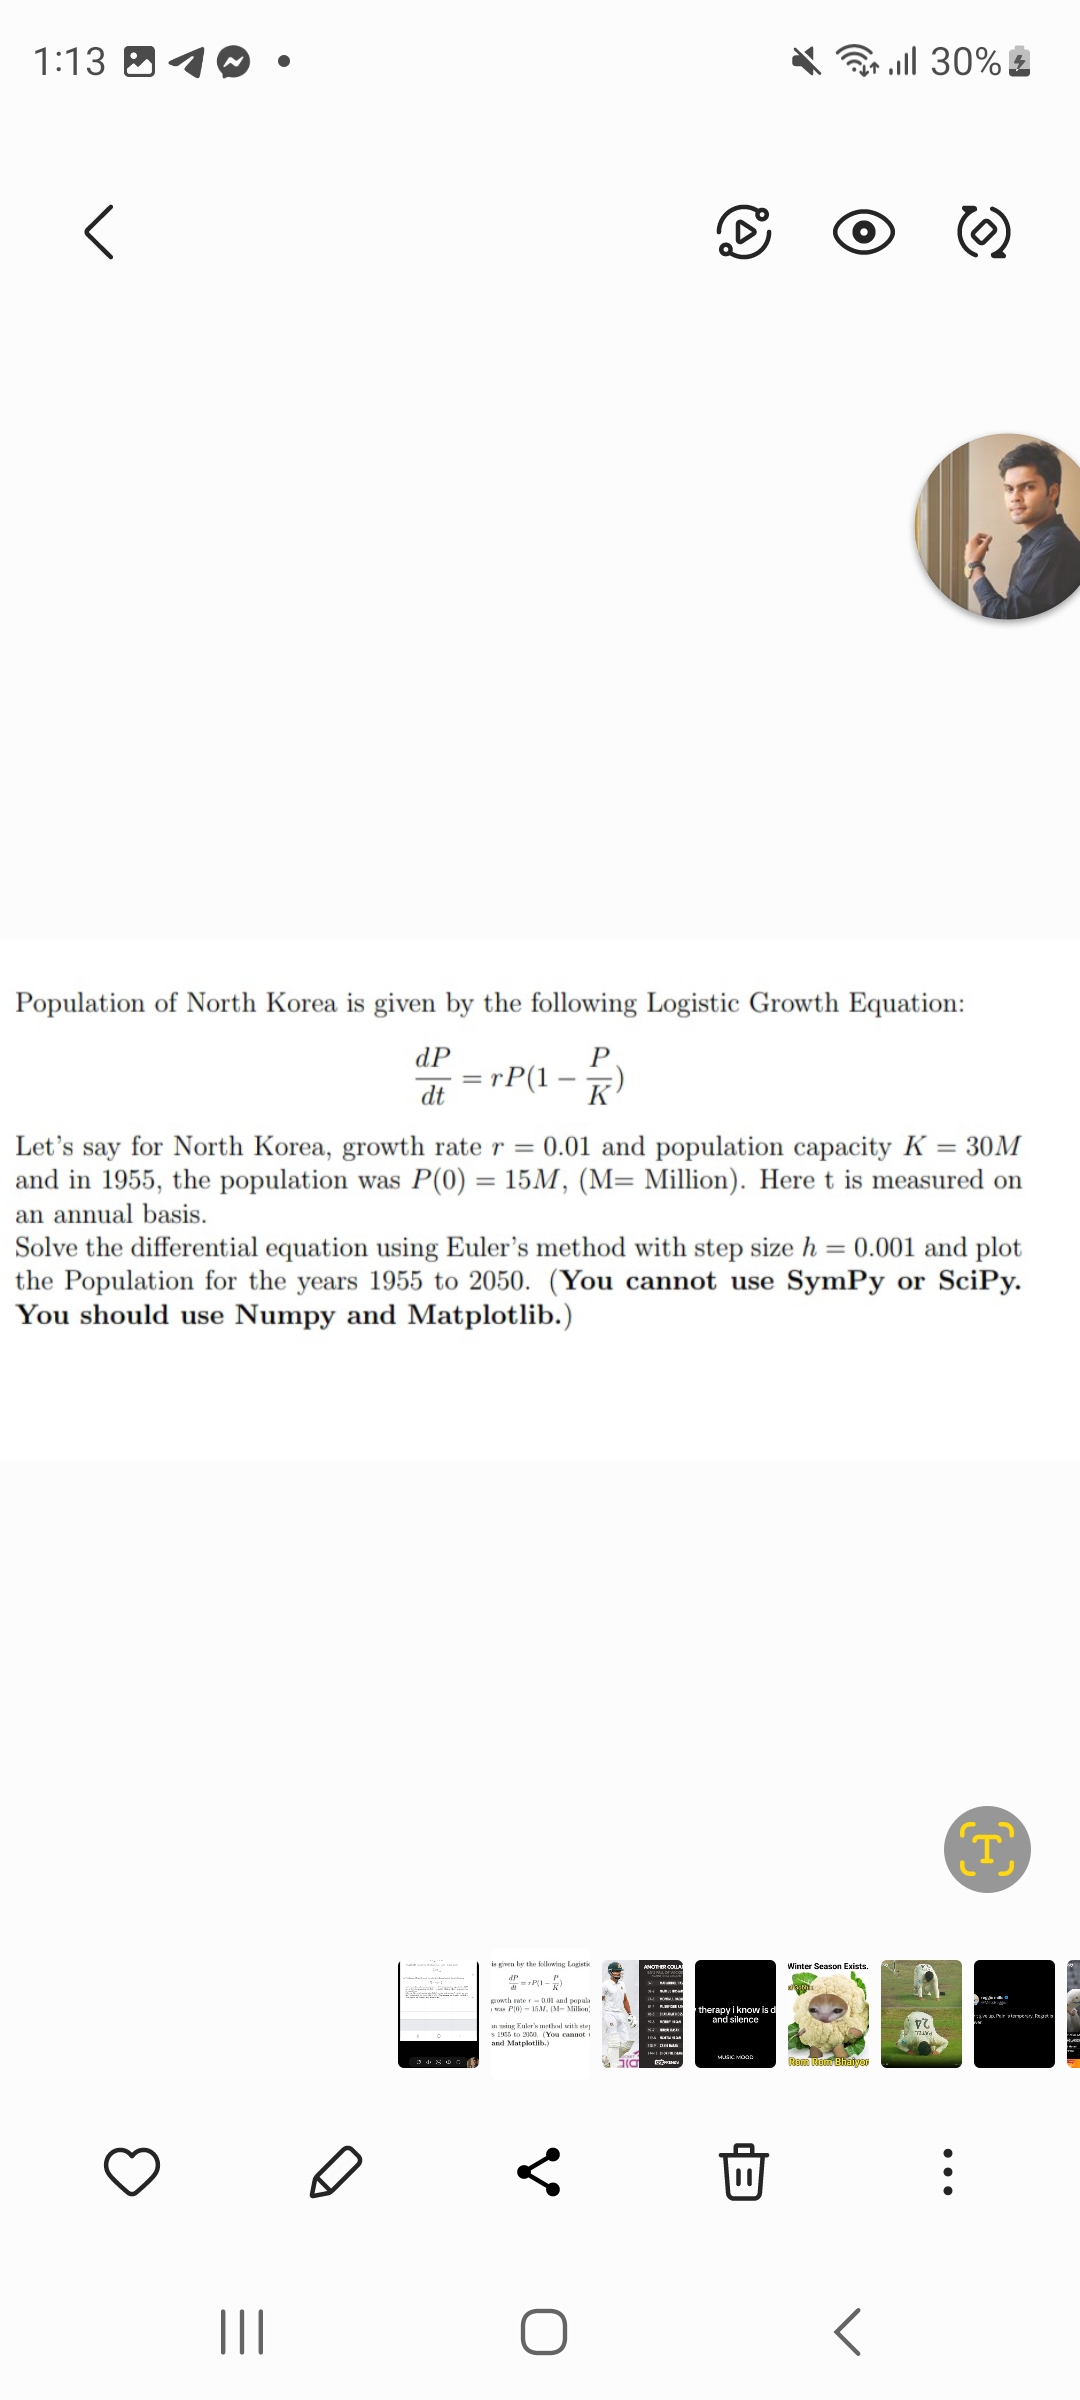 1:13
<
Population of North Korea is given by the following Logistic Growth Equation:
P
K
dP
dt
|||
= rP(1
=
34800
-
Let's say for North Korea, growth rate r = 0.01 and population capacity K = 30M
and in 1955, the population was P(0) = 15M, (M= Million). Here t is measured on
an annual basis.
Solve the differential equation using Euler's method with step size h = 0.001 and plot
the Population for the years 1955 to 2050. (You cannot use SymPy or Scipy.
You should use Numpy and Matplotlib.)
is given by the following Logistik
growth rate -
Brow
was P(0) 15.M. (M- Million)
ning Euler's method with step
s 1955 to 2050. (You cannot i
and Matplotlib.)
C
<
10
TOP DHIM
all 30%
therapy i know is d
and silence
MUSIC MOOD
||
Winter Season Exists.
Rom Rom Bhaiyer
<